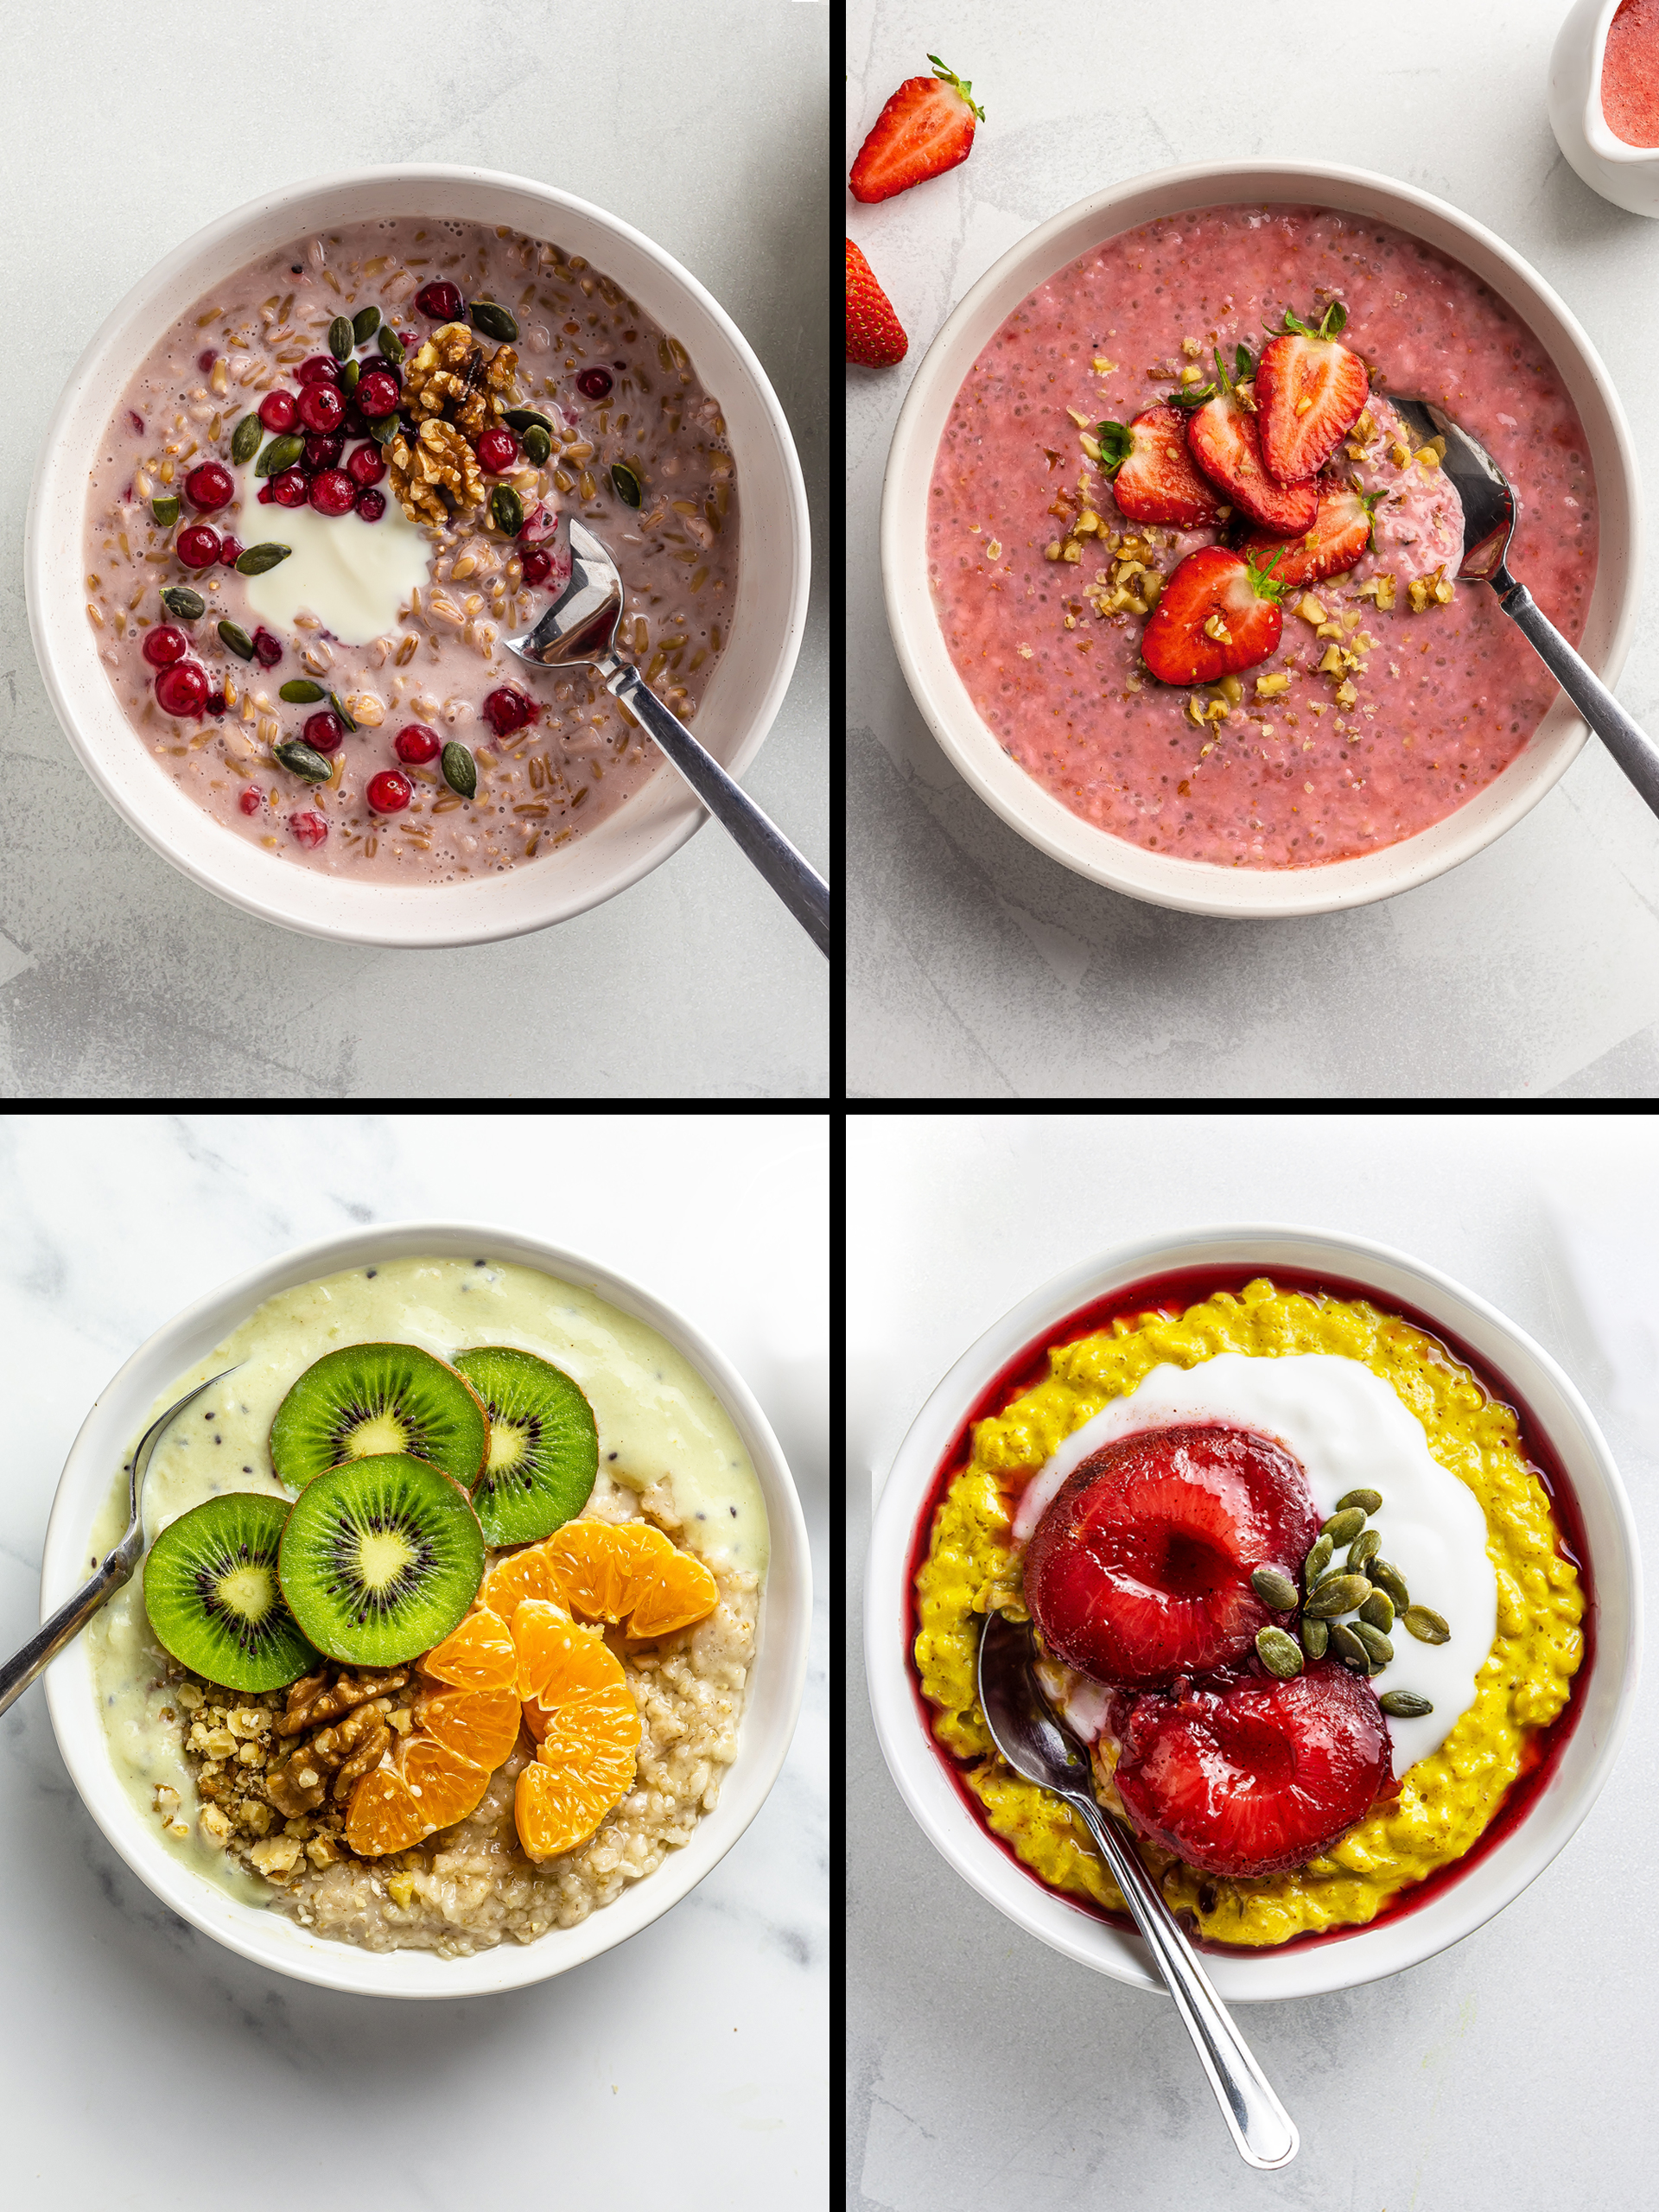 7 Ways to Jazz Up Your Morning Oatmeal